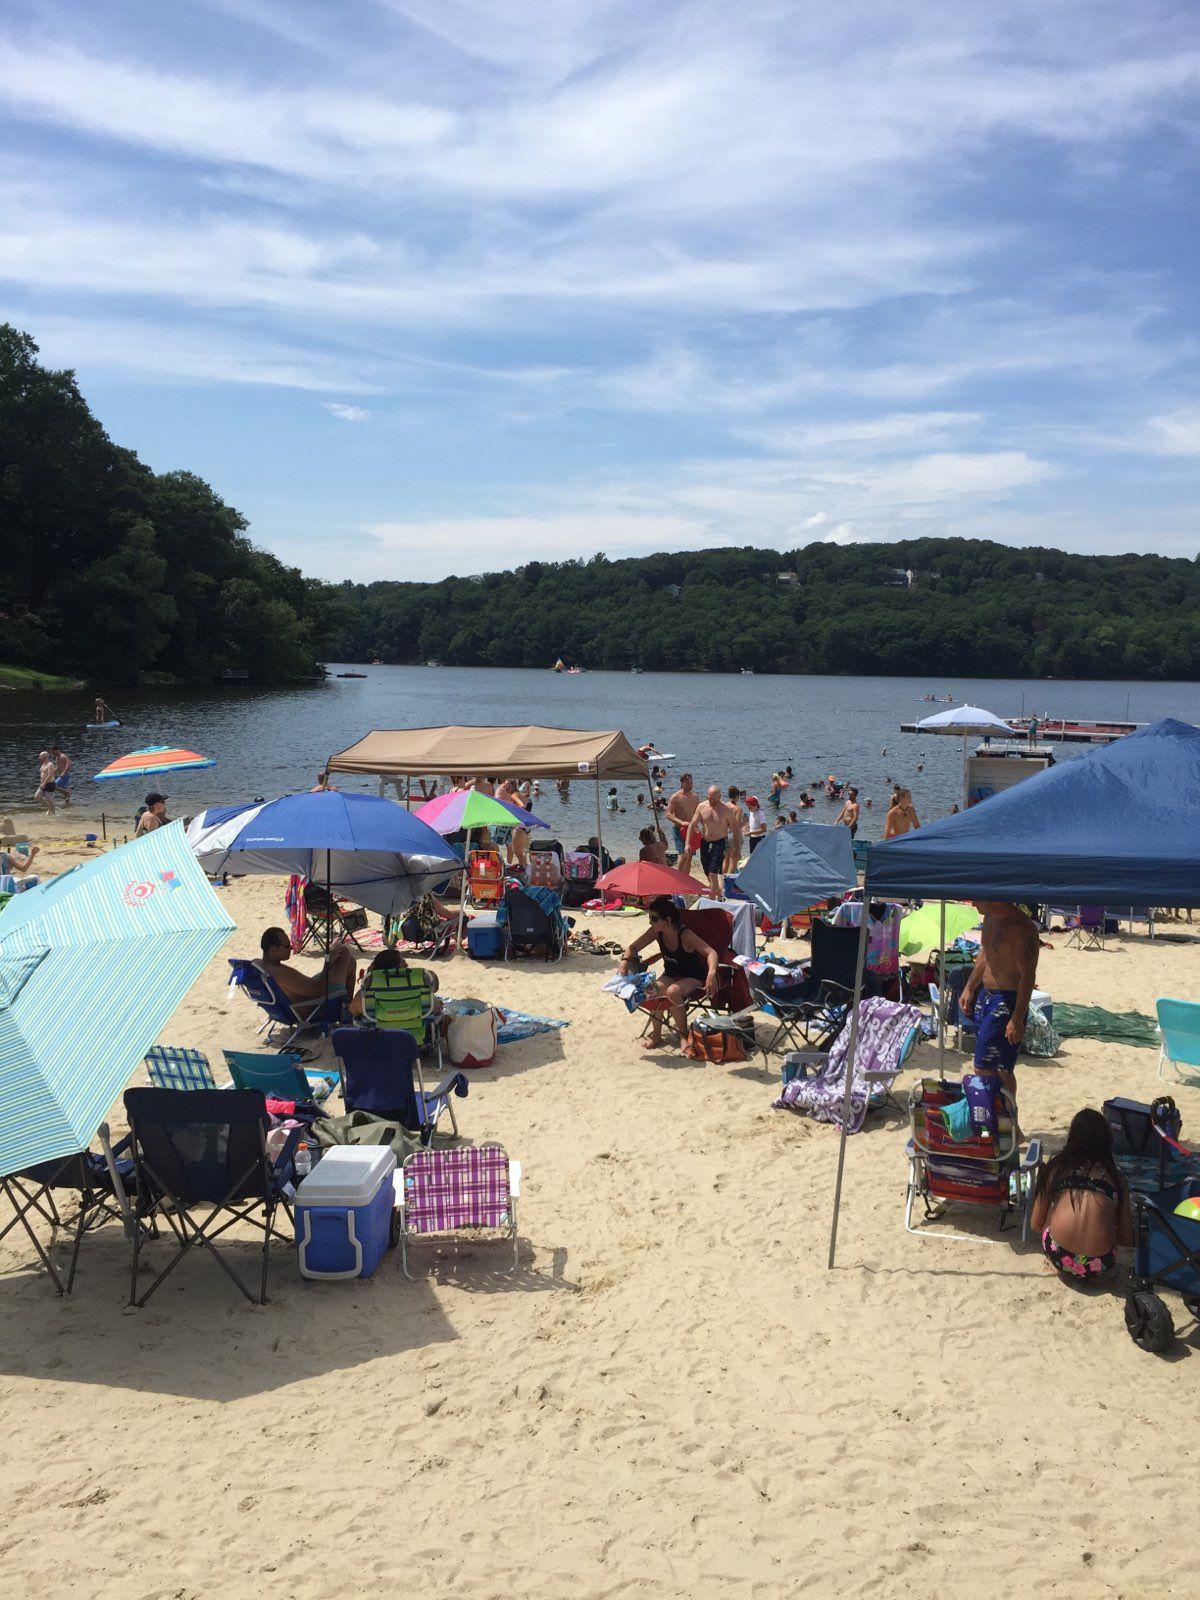 (VIDEO) Three days of festivities at White Meadow Lake The Citizen